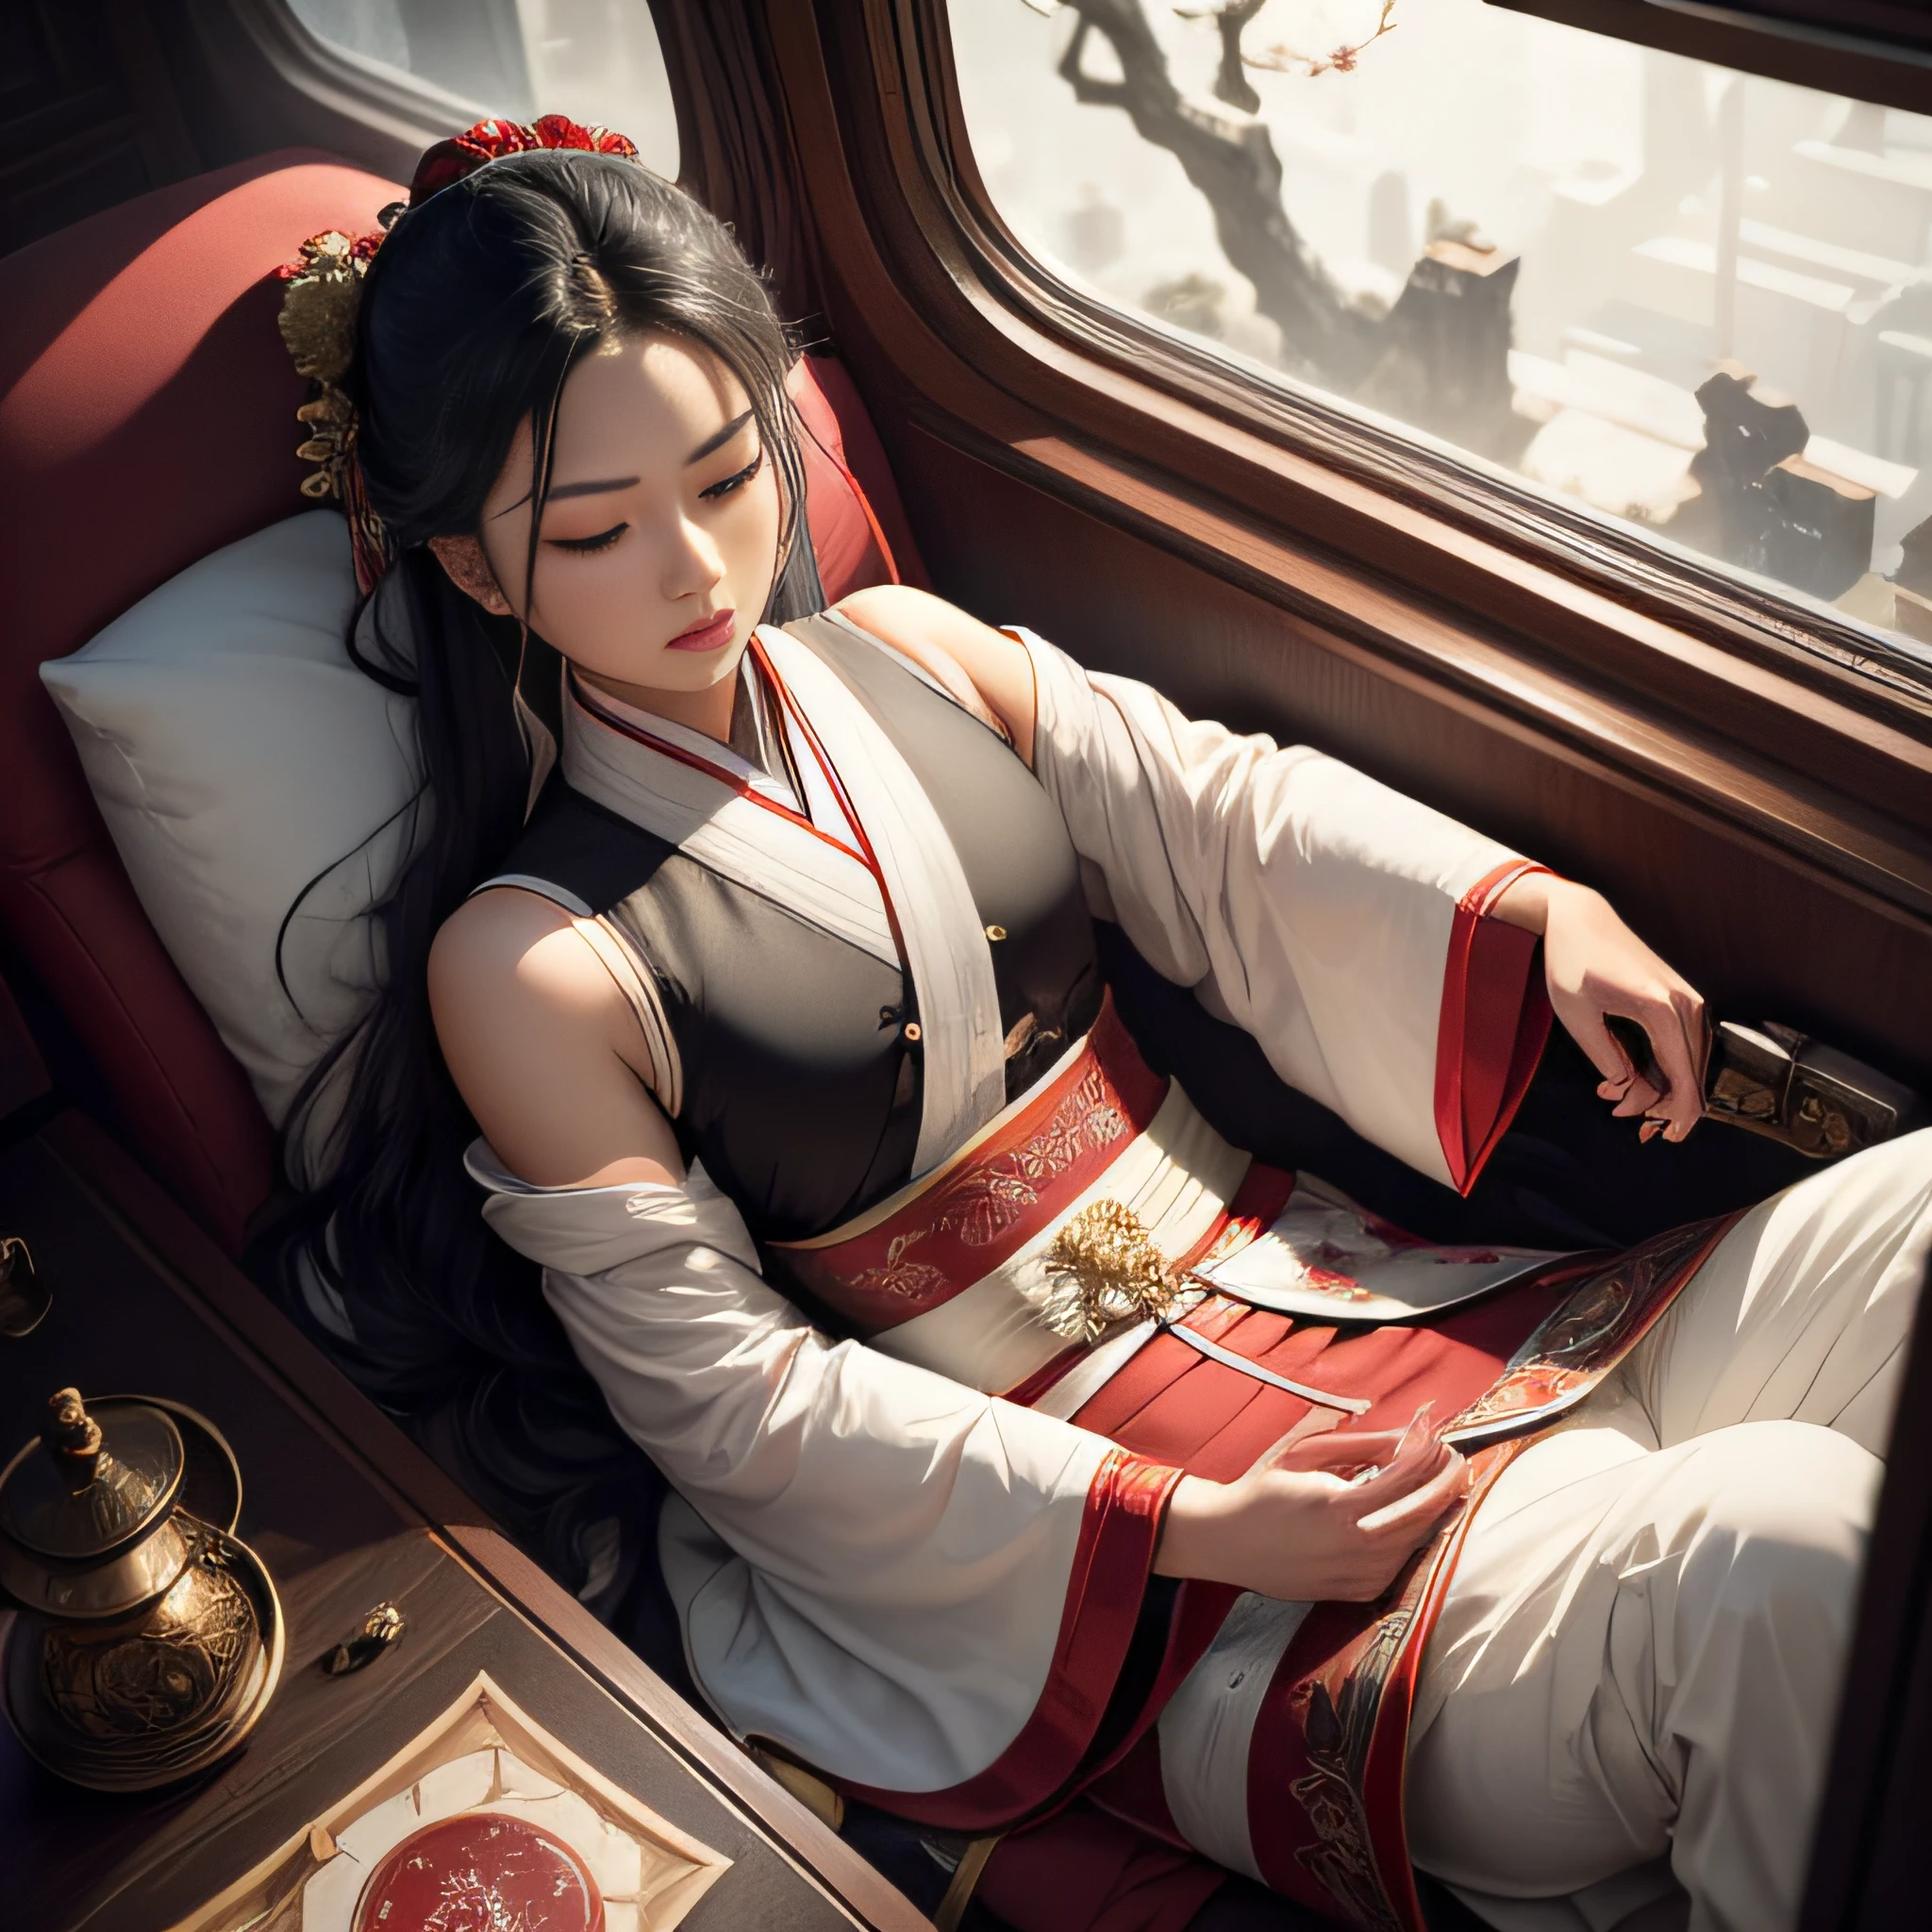 In the carriage, Li Xunhuan, Dressed in white, literati dressed, He was half-lying down, drink, Holding a porcelain wine jug and porcelain wine glass, hair over shoulder, black hair, kanzashi, hair bobbles, eyes closed, hair scrunchie, kanzashi, hair tie, Art Deco, Cubism, viewfinder, from above, foreshortening, from side